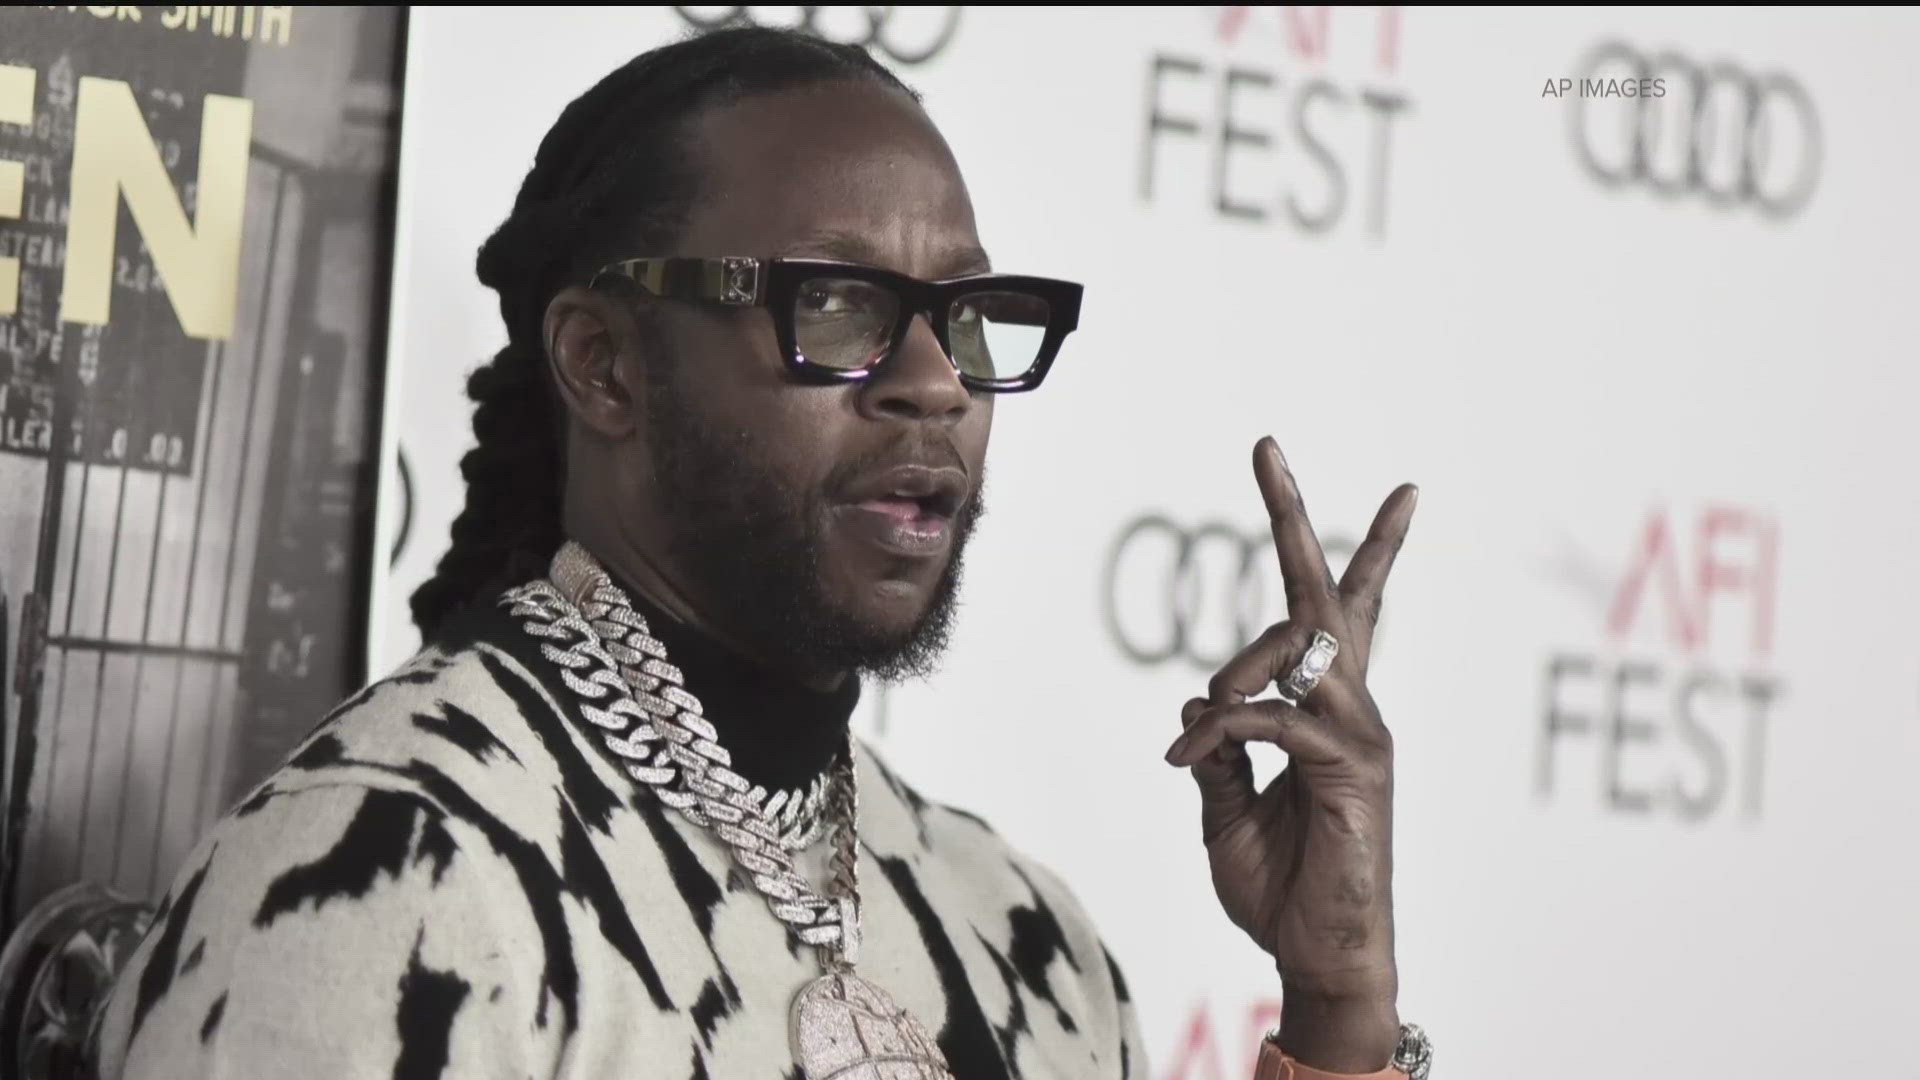 Atlanta rapper 2 Chainz has announced a partnership with Smoothie King. He will open a kiosk at State Farm Arena.